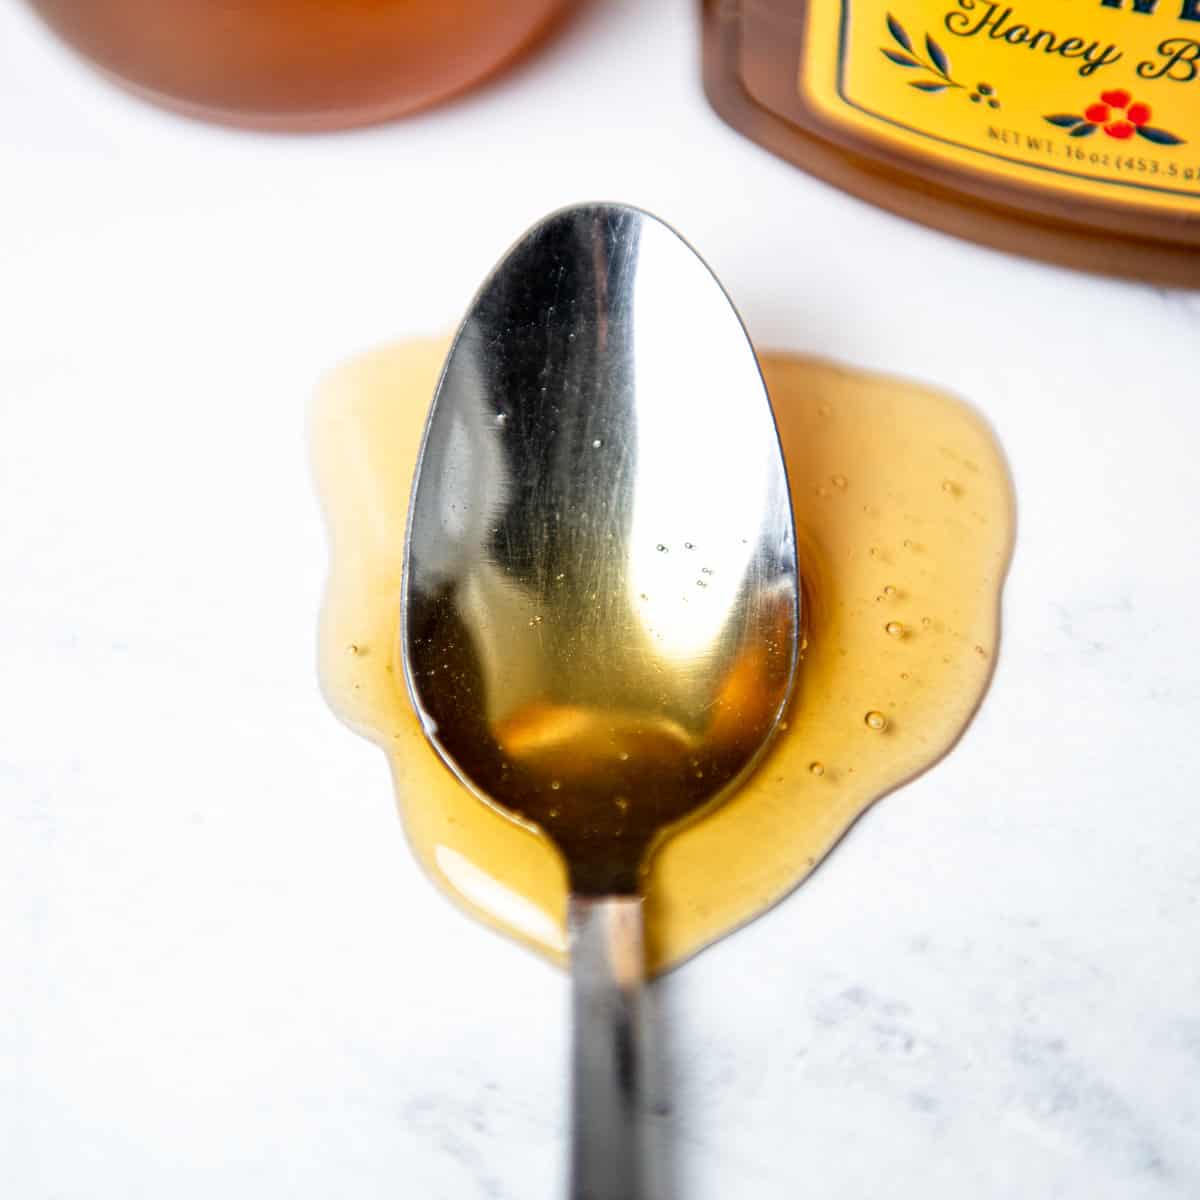 Honey dripping off a spoon.